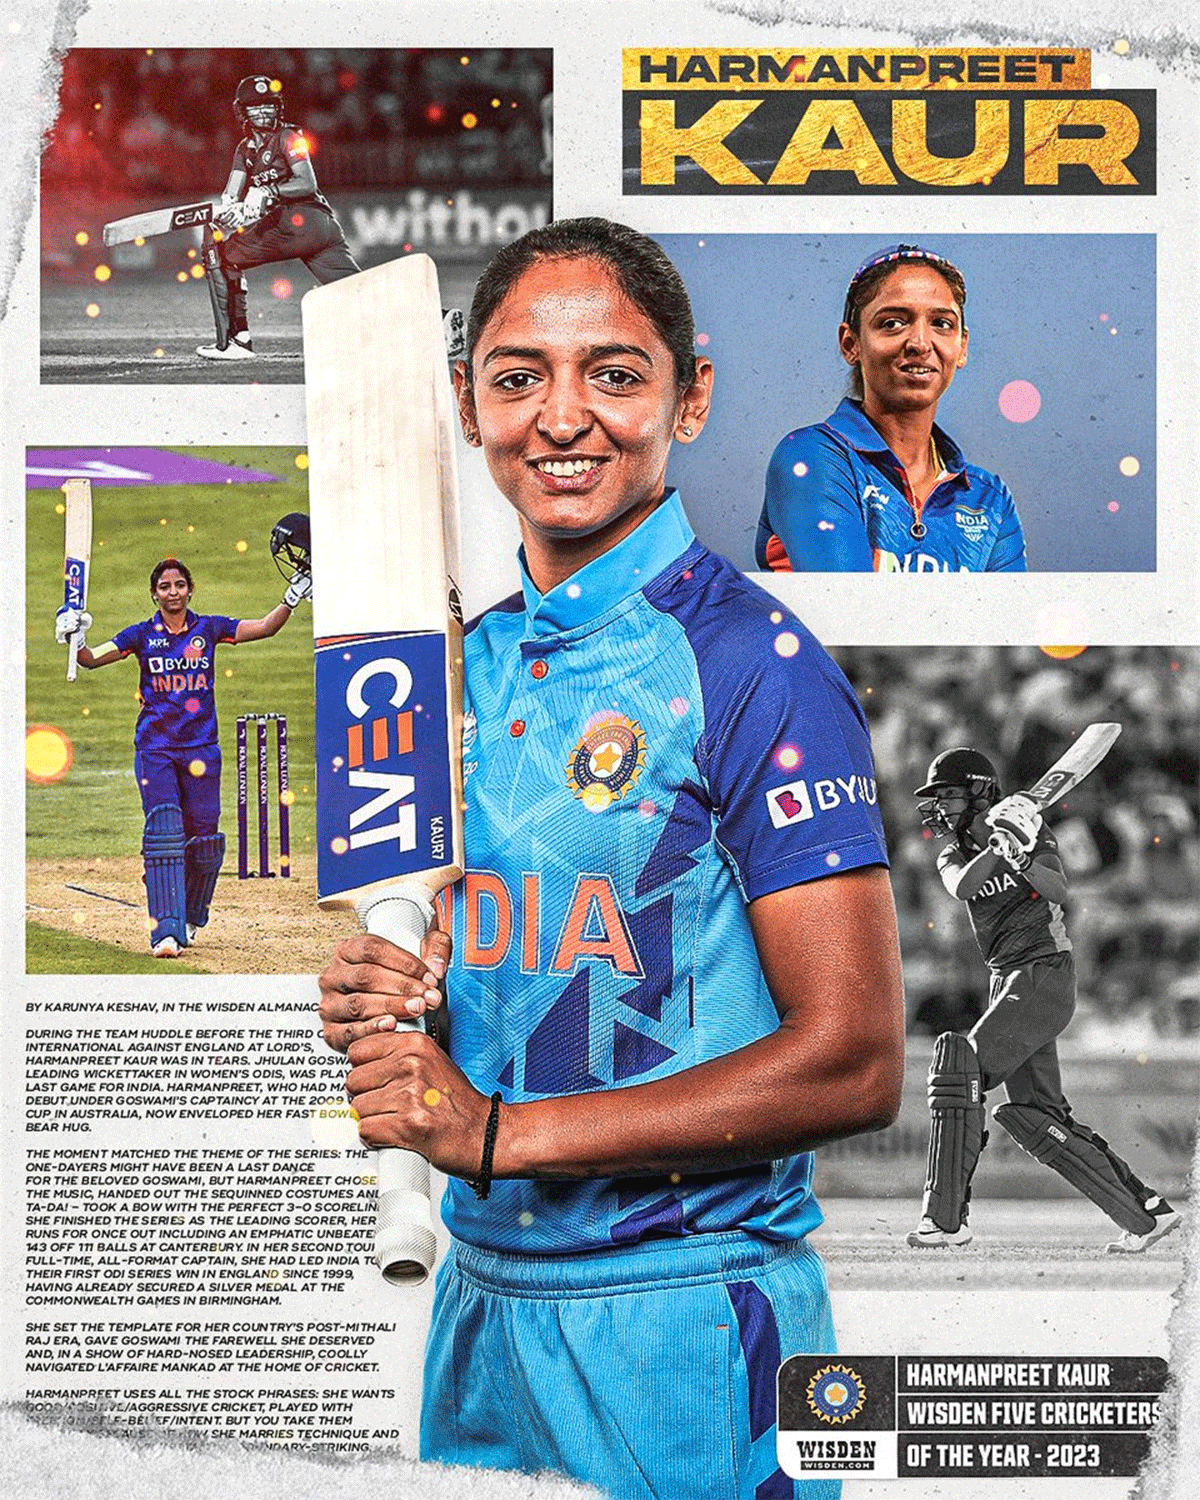 Harmanpreet Kaur becomes first Indian woman to be named Wisden's Woman Cricketer of the Year